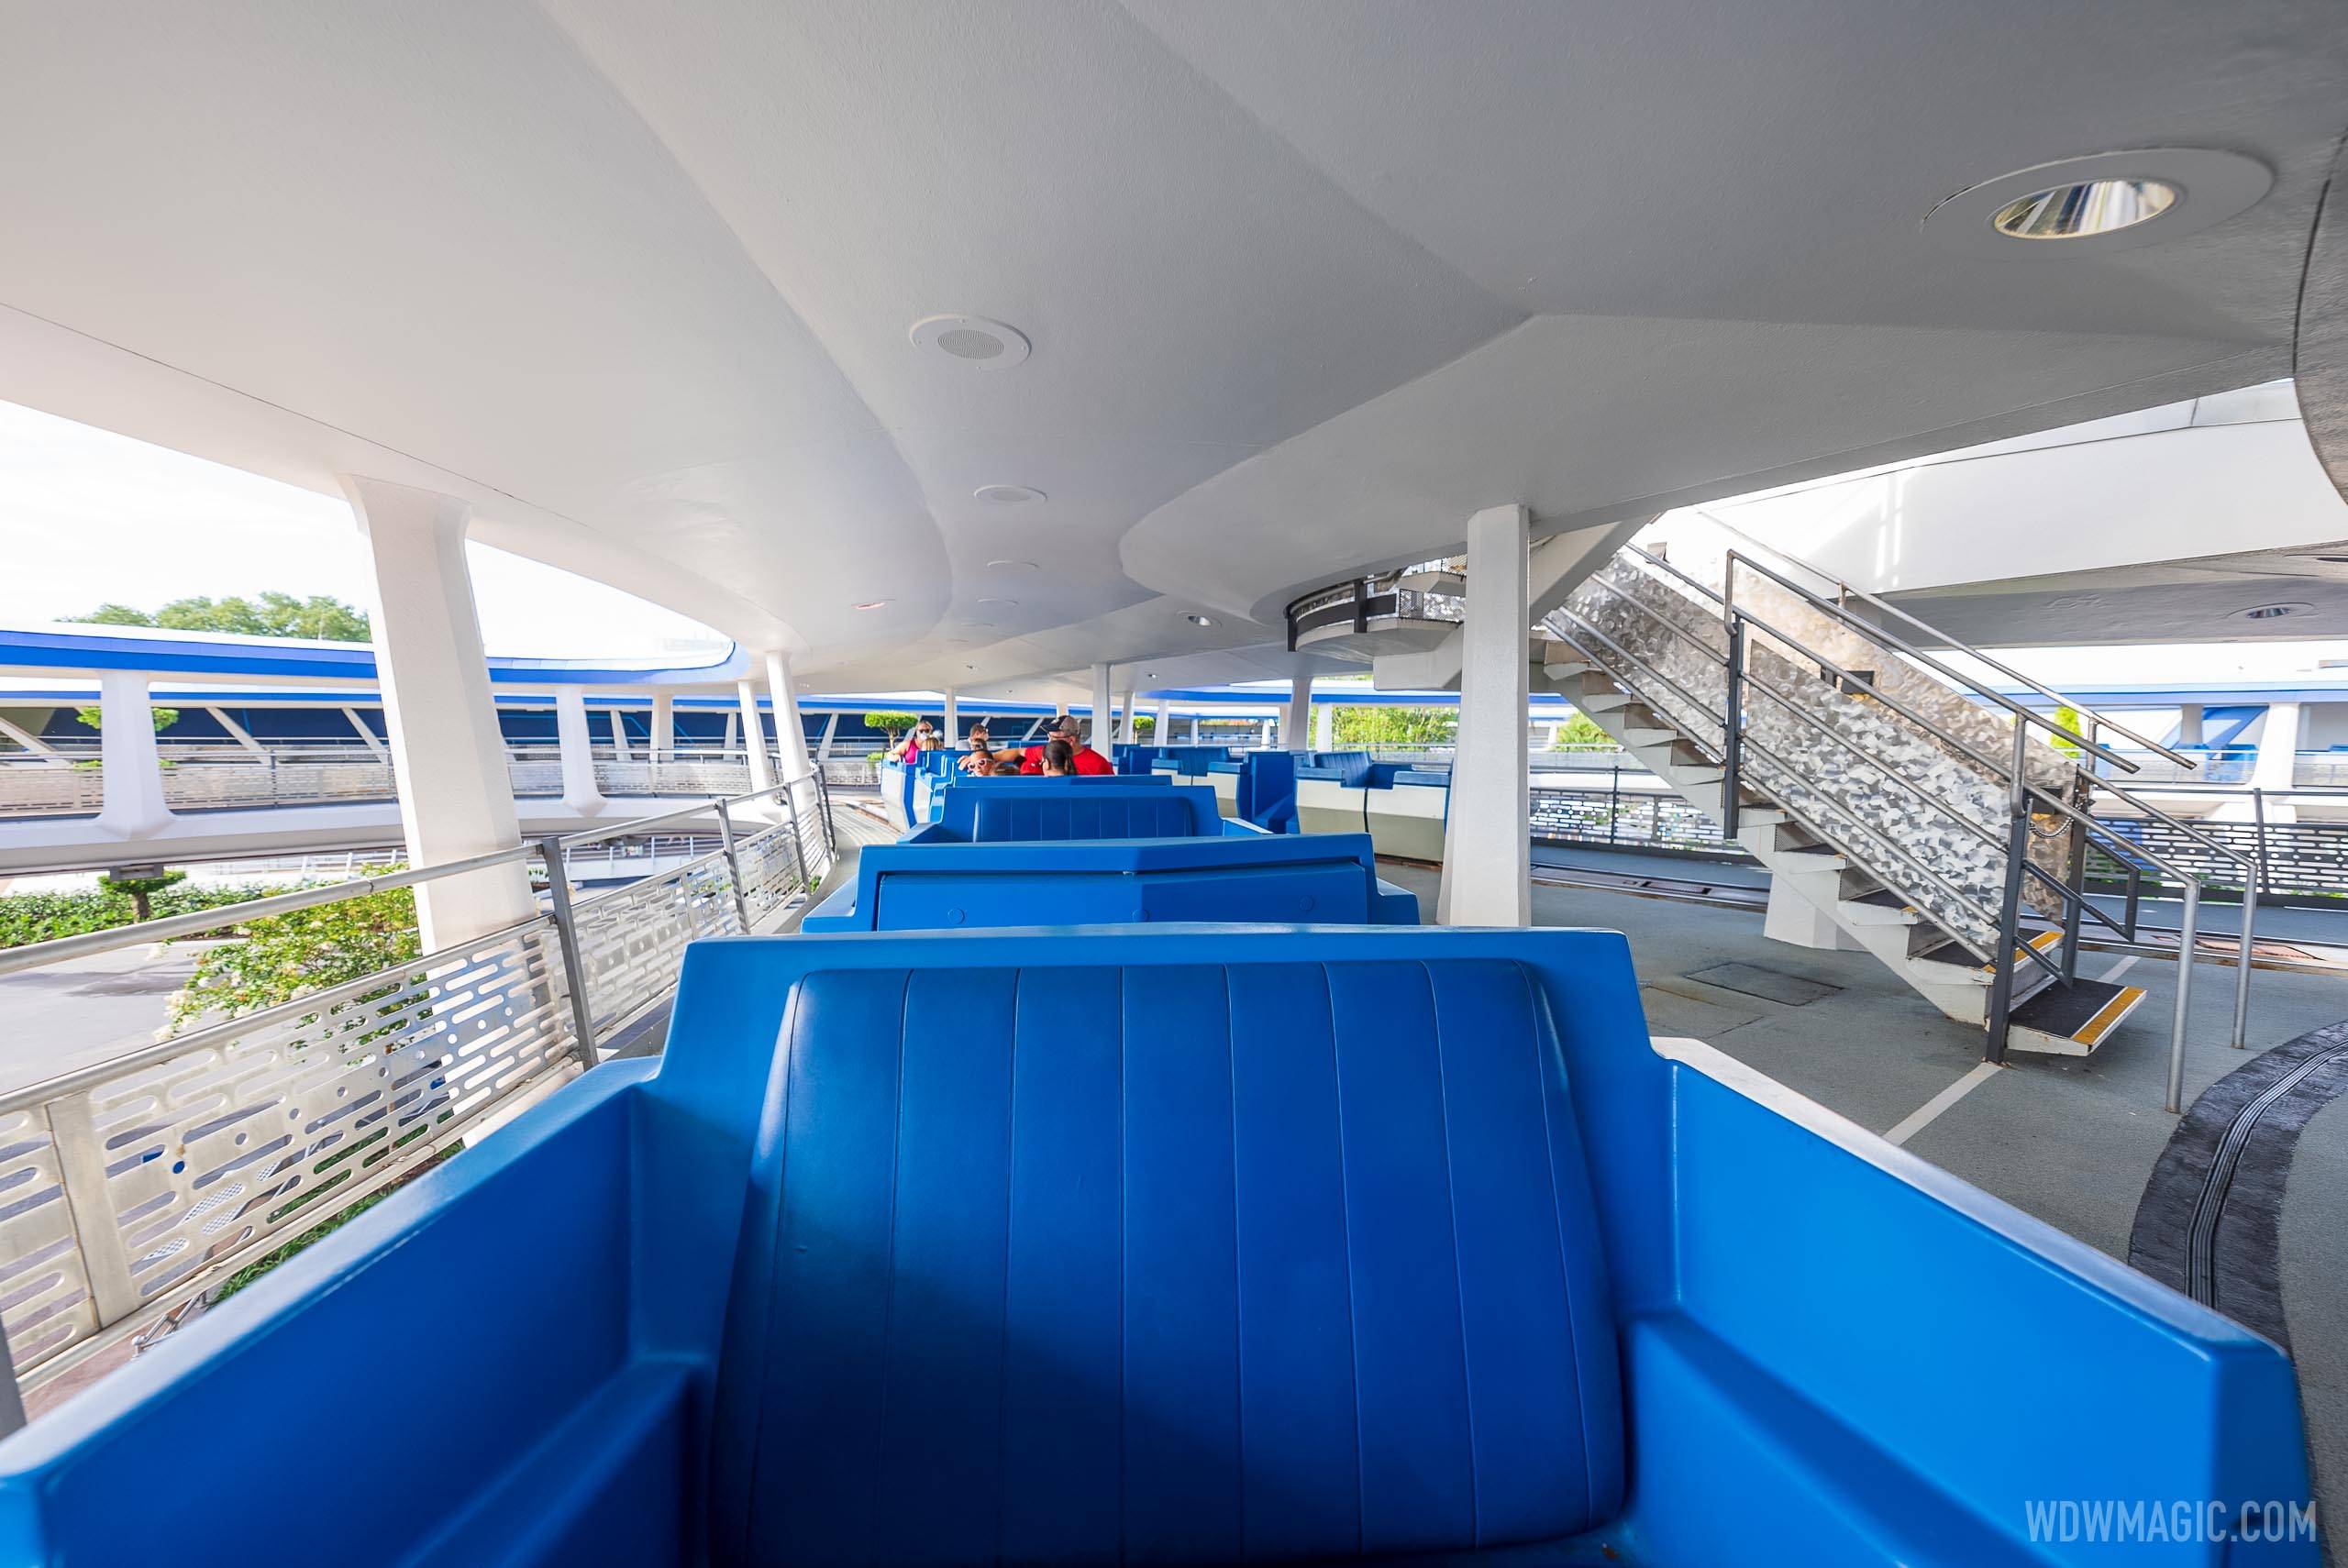 Tomorrowland Transit Authority PeopleMover overview